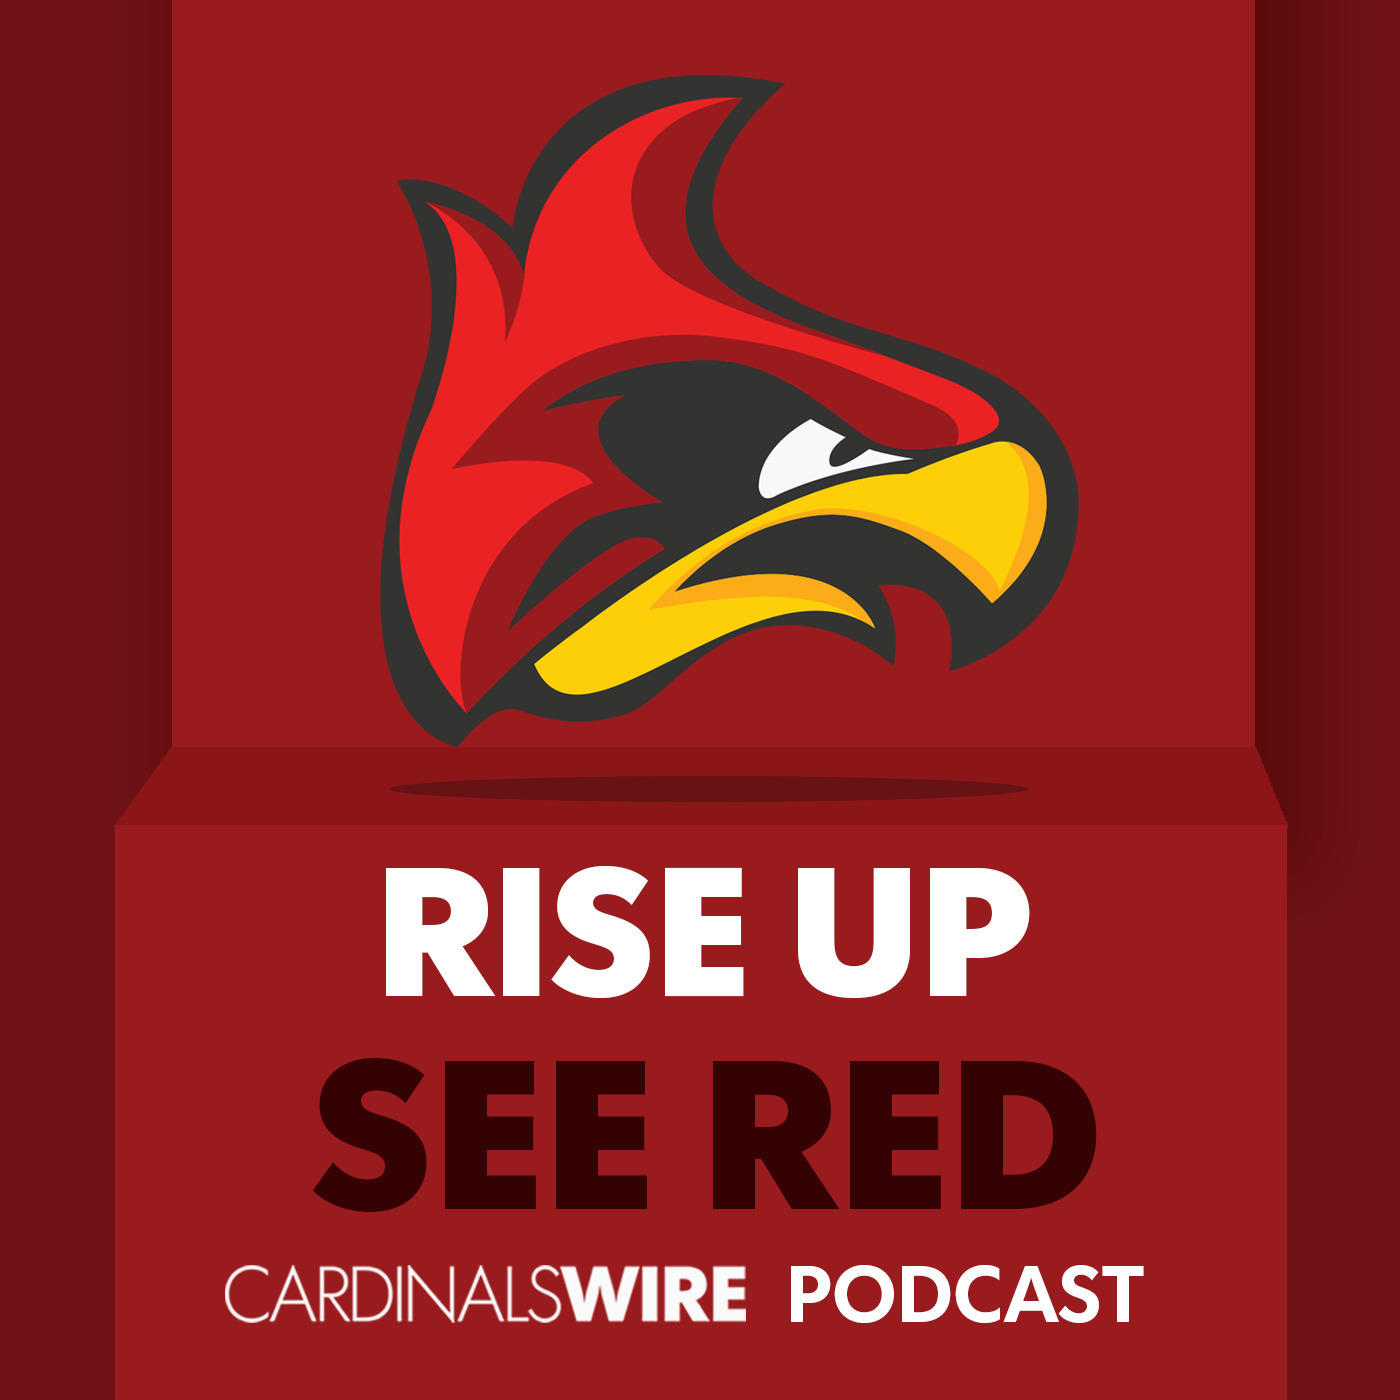 Cardinals-Eagles Week 17 preview with Glen Erby